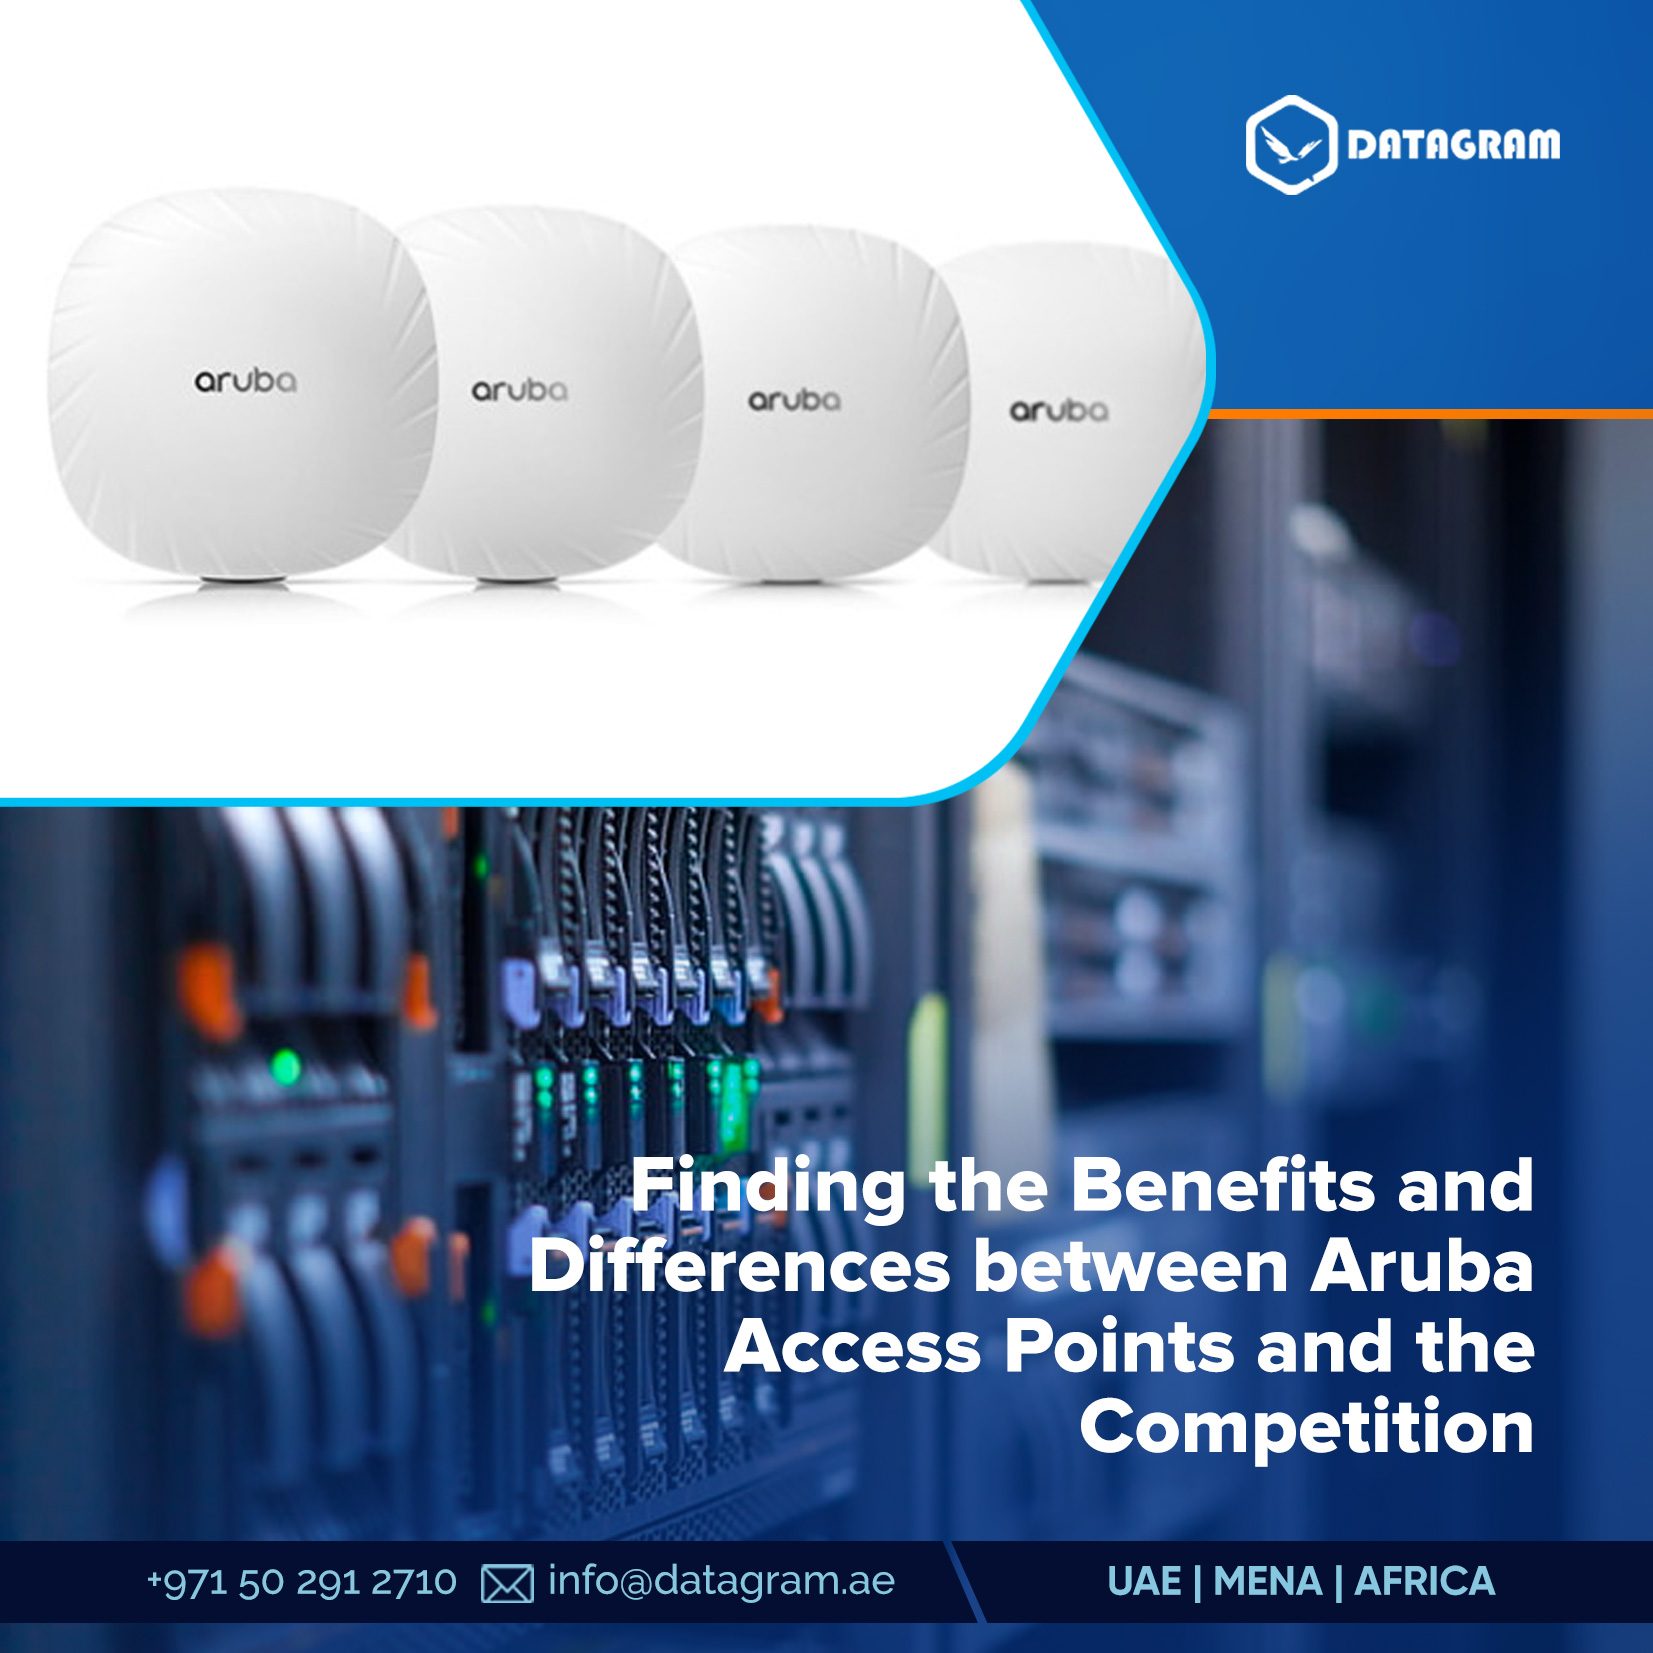 Finding the Benefits and Differences between Aruba Access Points and the Competition